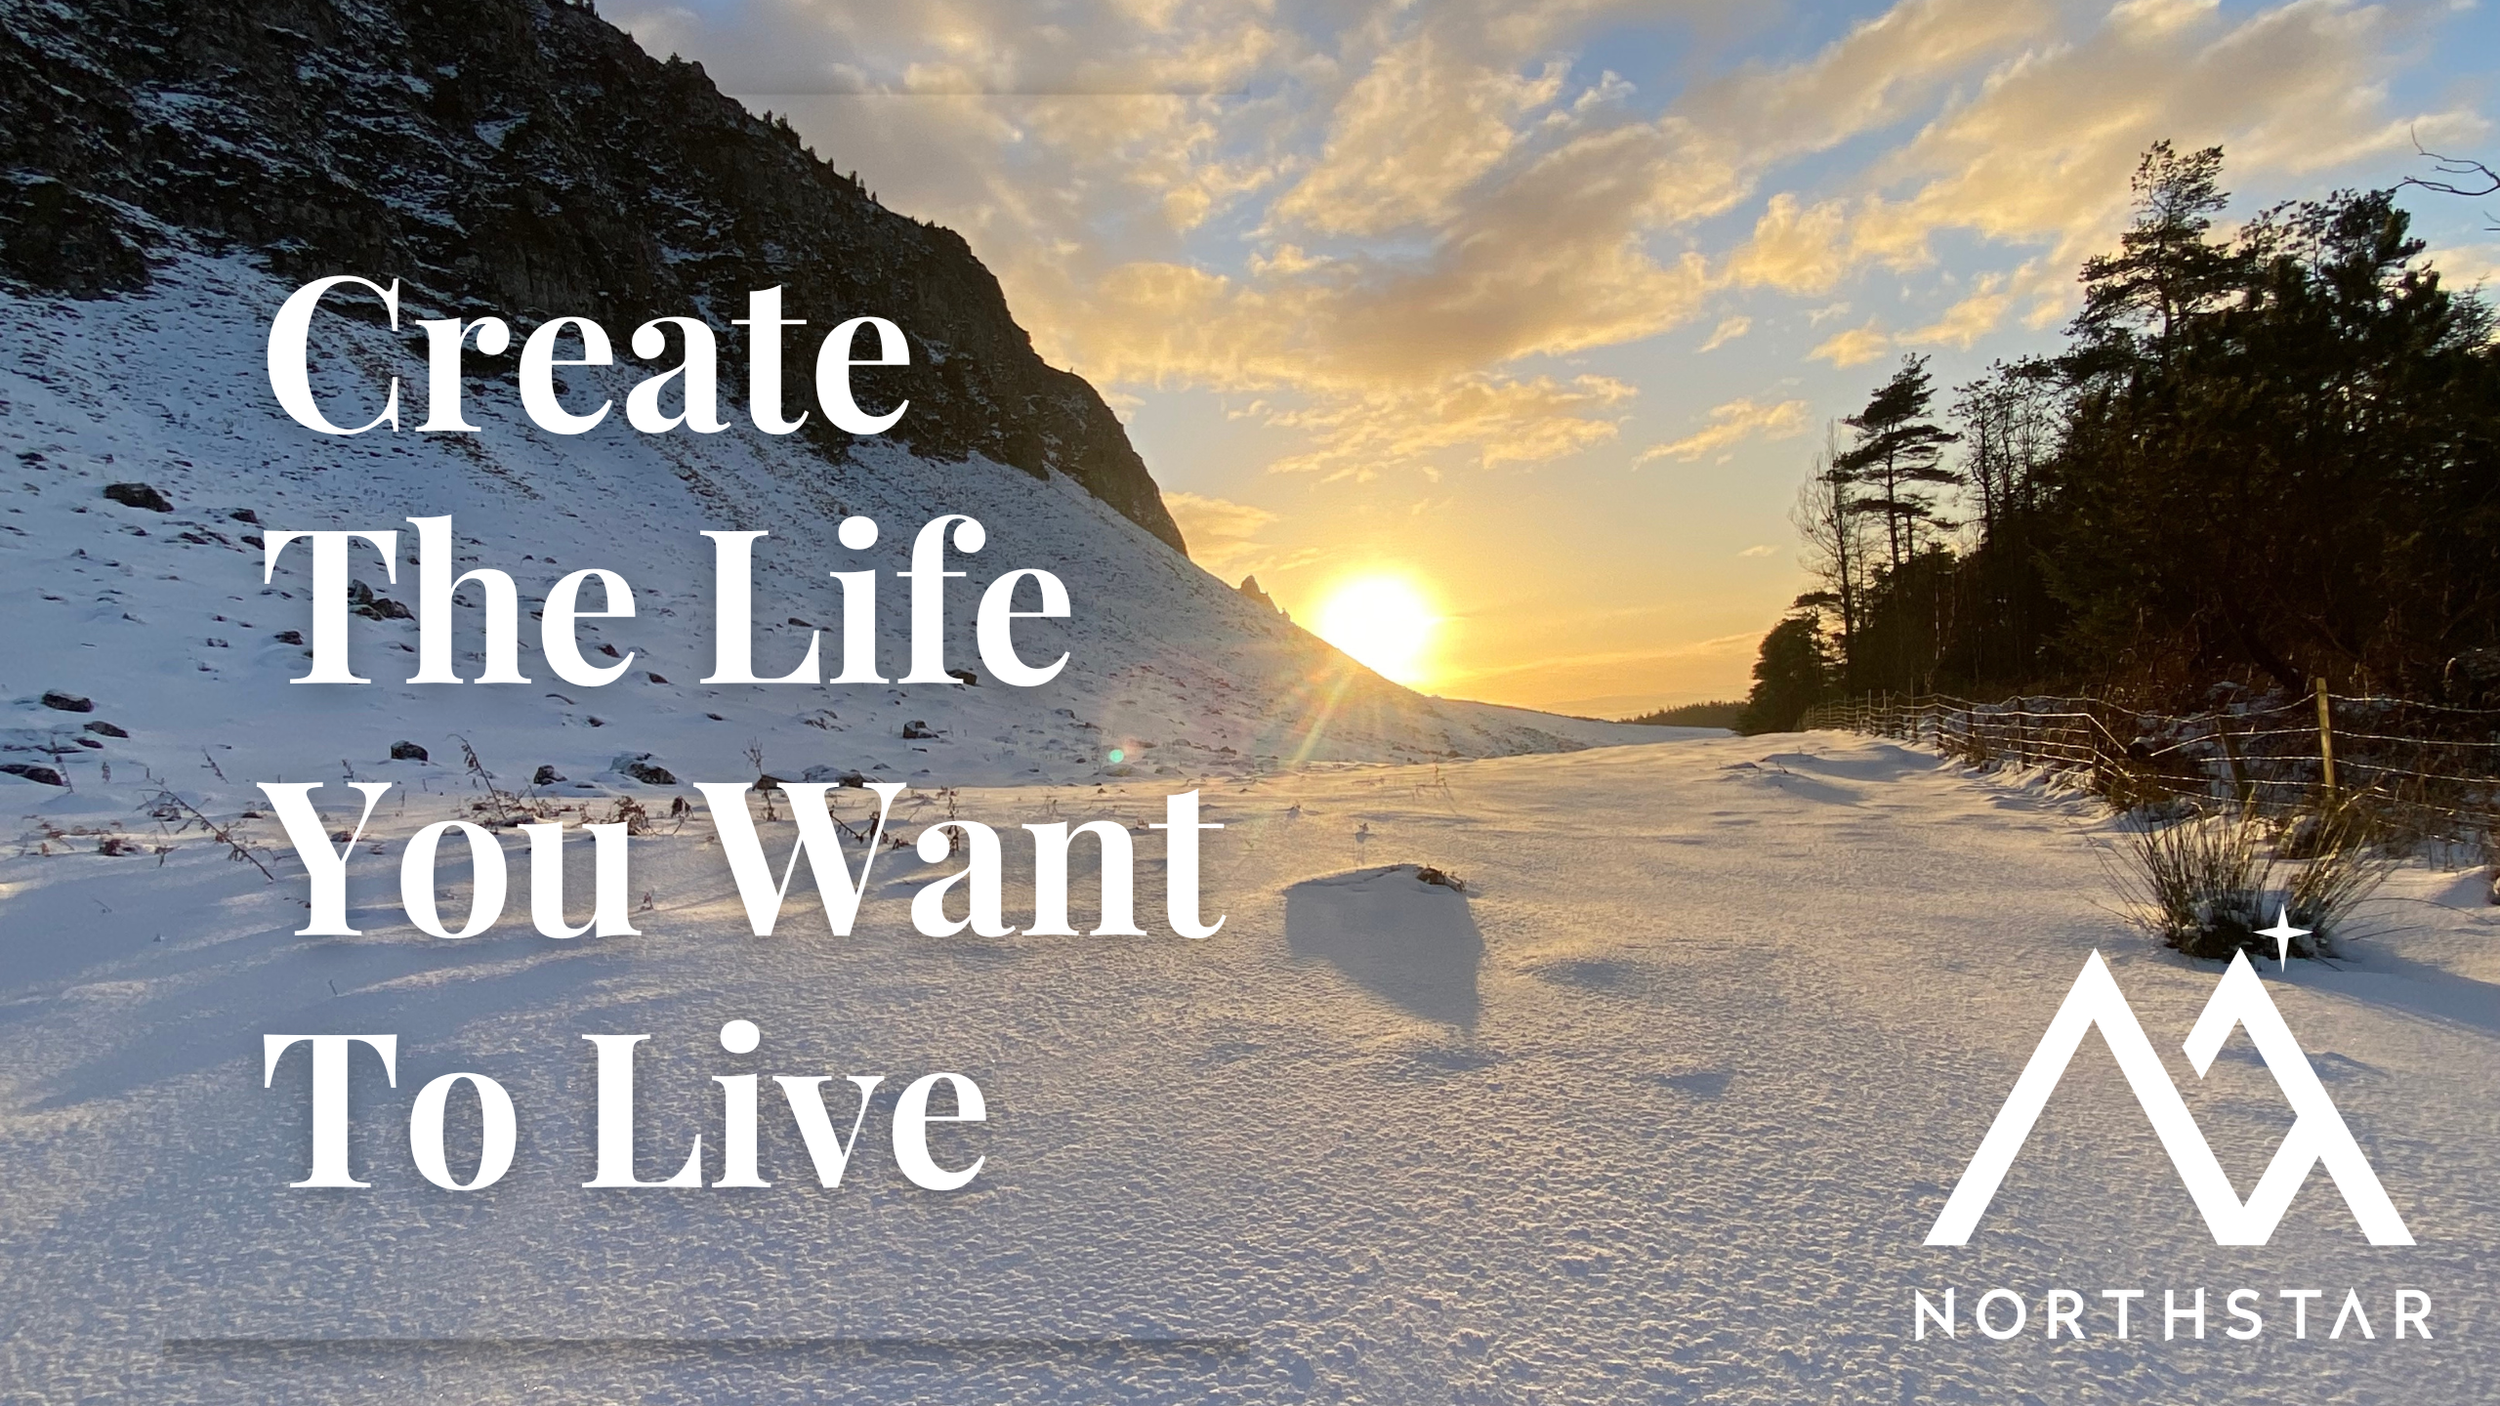 create the life you want